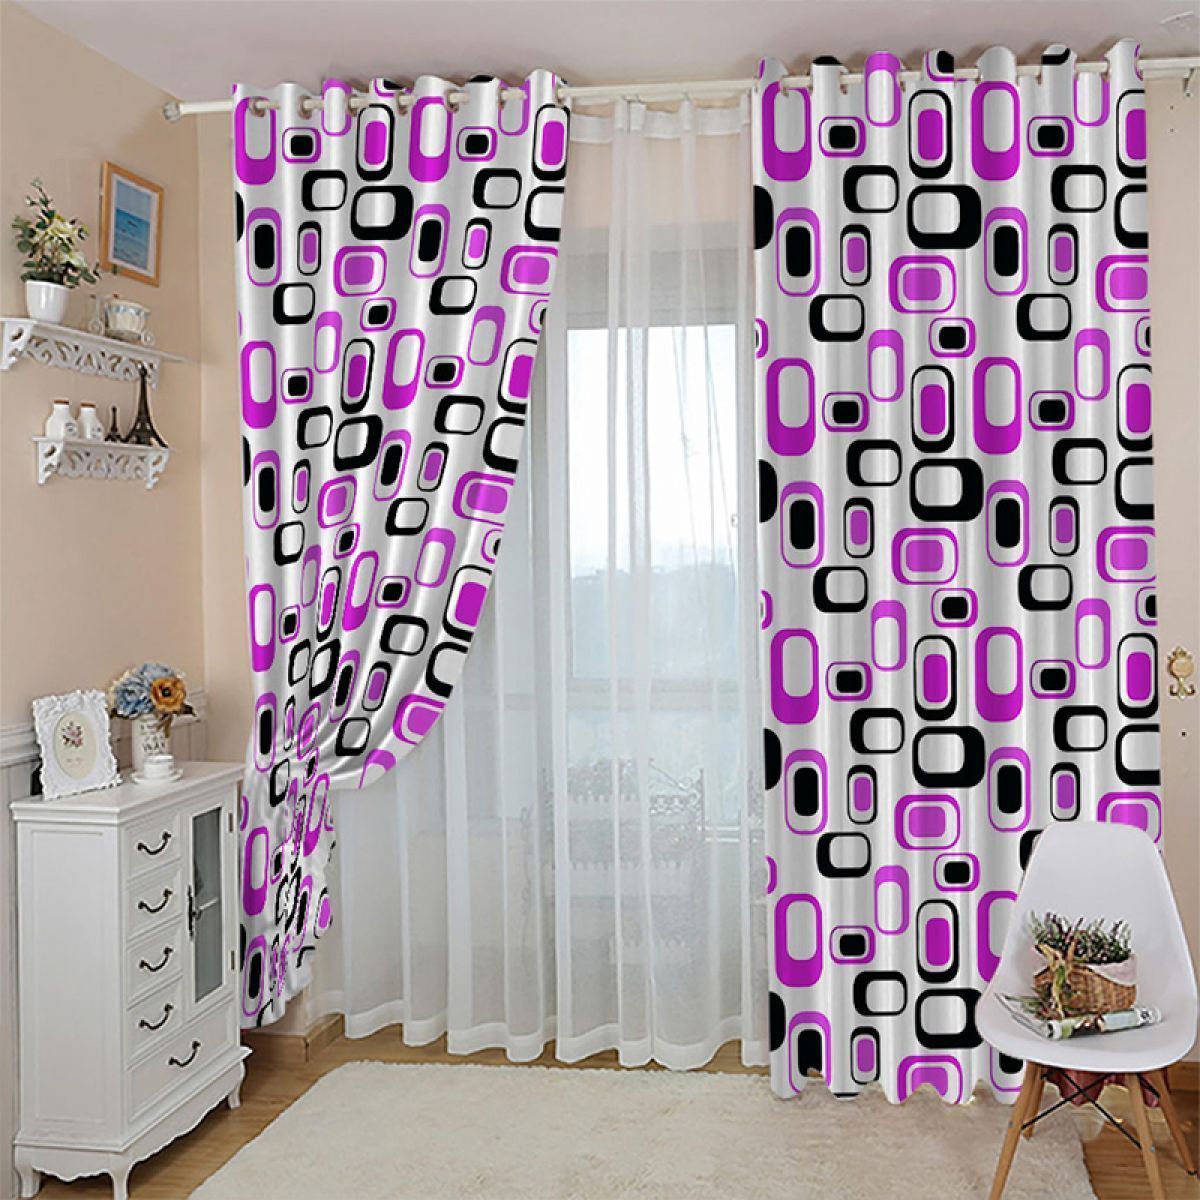 3d Rounded Rectangles Purple And Black Printed Window Curtain Home Decor